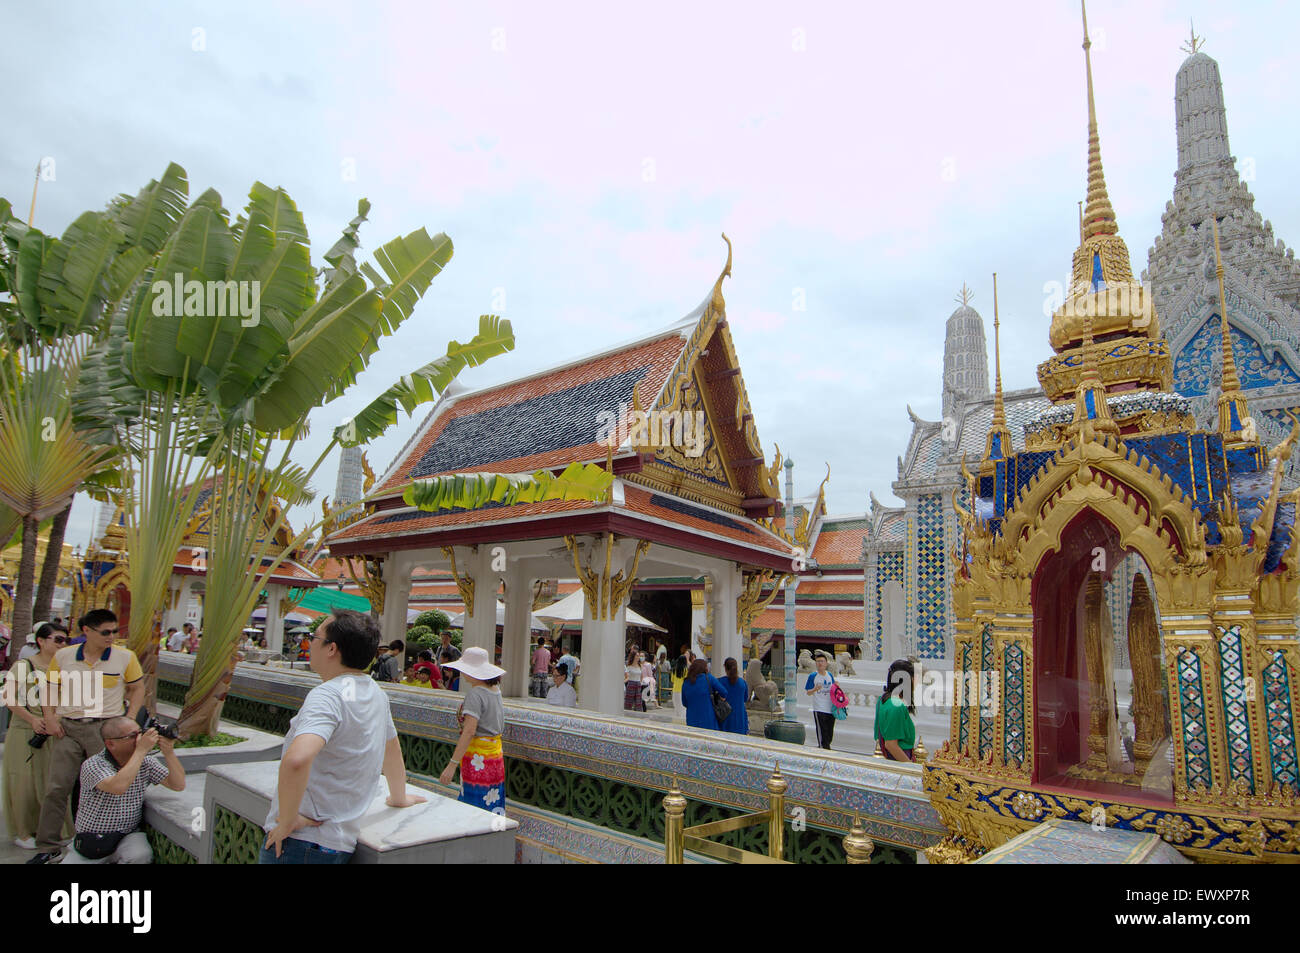 A Wat Phra Kaew Inner Compound Structure - Temple of the Emerald Buddha; full official name Wat Phra Si Rattana Satsadaram Stock Photo